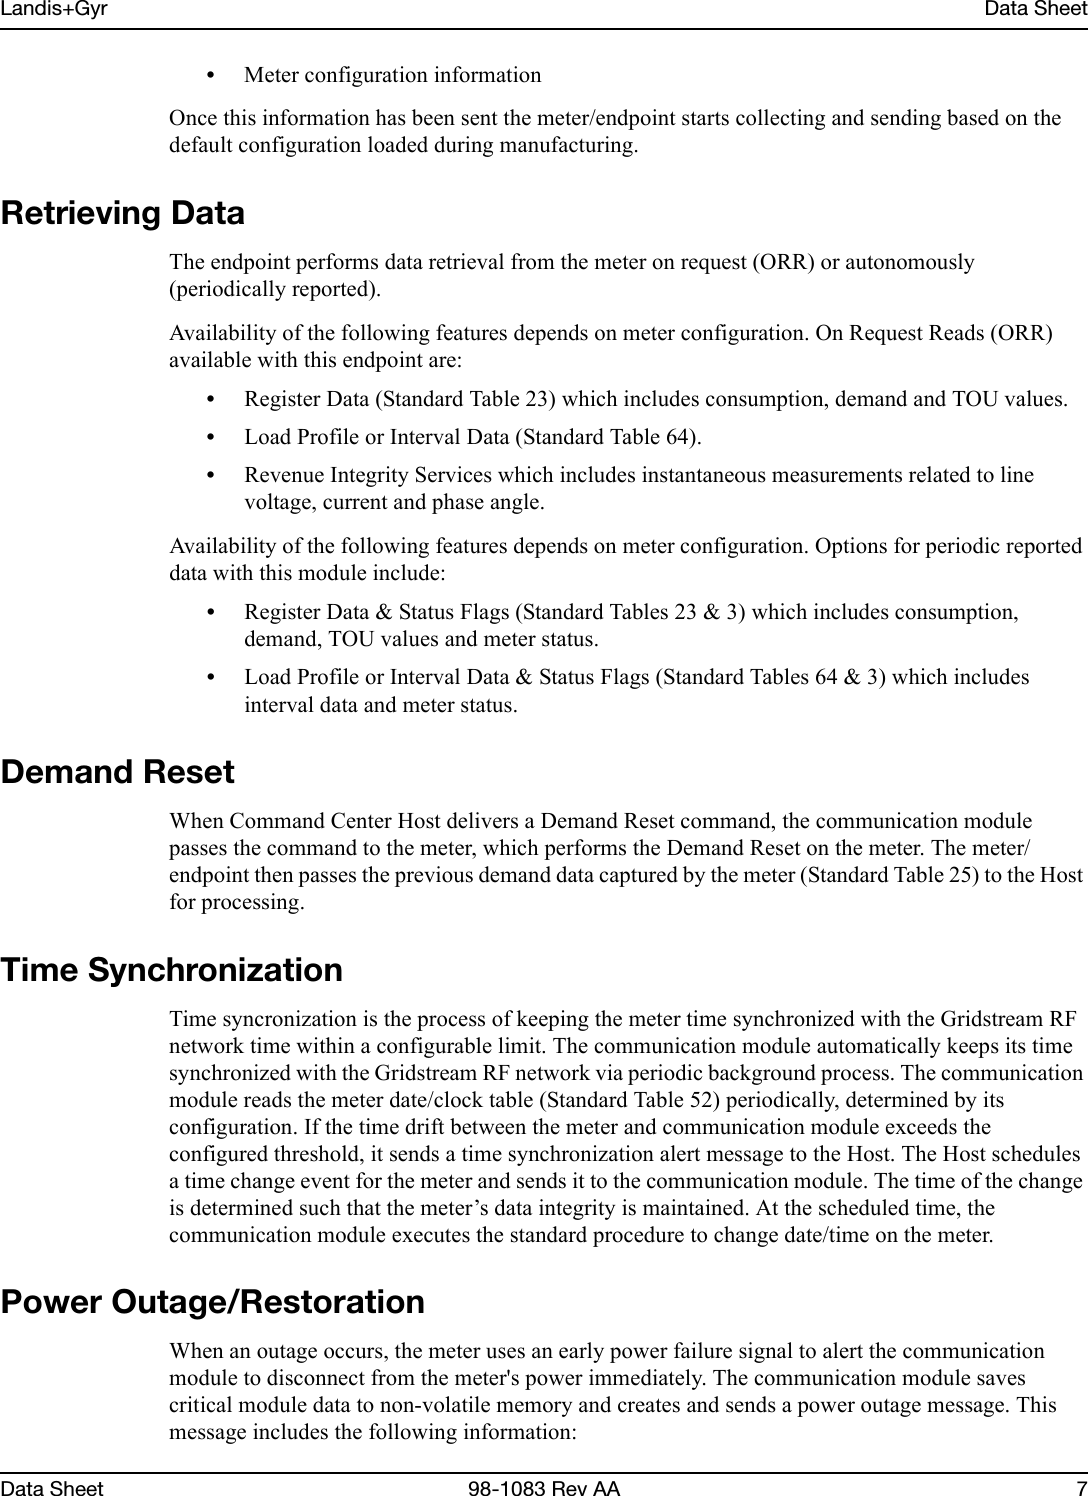 Landis+Gyr Data SheetData Sheet 98-1083 Rev AA 7•Meter configuration informationOnce this information has been sent the meter/endpoint starts collecting and sending based on the default configuration loaded during manufacturing.Retrieving DataThe endpoint performs data retrieval from the meter on request (ORR) or autonomously (periodically reported). Availability of the following features depends on meter configuration. On Request Reads (ORR) available with this endpoint are:•Register Data (Standard Table 23) which includes consumption, demand and TOU values.•Load Profile or Interval Data (Standard Table 64).•Revenue Integrity Services which includes instantaneous measurements related to line voltage, current and phase angle.Availability of the following features depends on meter configuration. Options for periodic reported data with this module include:•Register Data &amp; Status Flags (Standard Tables 23 &amp; 3) which includes consumption, demand, TOU values and meter status.•Load Profile or Interval Data &amp; Status Flags (Standard Tables 64 &amp; 3) which includes interval data and meter status.Demand ResetWhen Command Center Host delivers a Demand Reset command, the communication module passes the command to the meter, which performs the Demand Reset on the meter. The meter/endpoint then passes the previous demand data captured by the meter (Standard Table 25) to the Host for processing.Time SynchronizationTime syncronization is the process of keeping the meter time synchronized with the Gridstream RF network time within a configurable limit. The communication module automatically keeps its time synchronized with the Gridstream RF network via periodic background process. The communication module reads the meter date/clock table (Standard Table 52) periodically, determined by its configuration. If the time drift between the meter and communication module exceeds the configured threshold, it sends a time synchronization alert message to the Host. The Host schedules a time change event for the meter and sends it to the communication module. The time of the change is determined such that the meter’s data integrity is maintained. At the scheduled time, the communication module executes the standard procedure to change date/time on the meter.Power Outage/RestorationWhen an outage occurs, the meter uses an early power failure signal to alert the communication module to disconnect from the meter&apos;s power immediately. The communication module saves critical module data to non-volatile memory and creates and sends a power outage message. This message includes the following information: